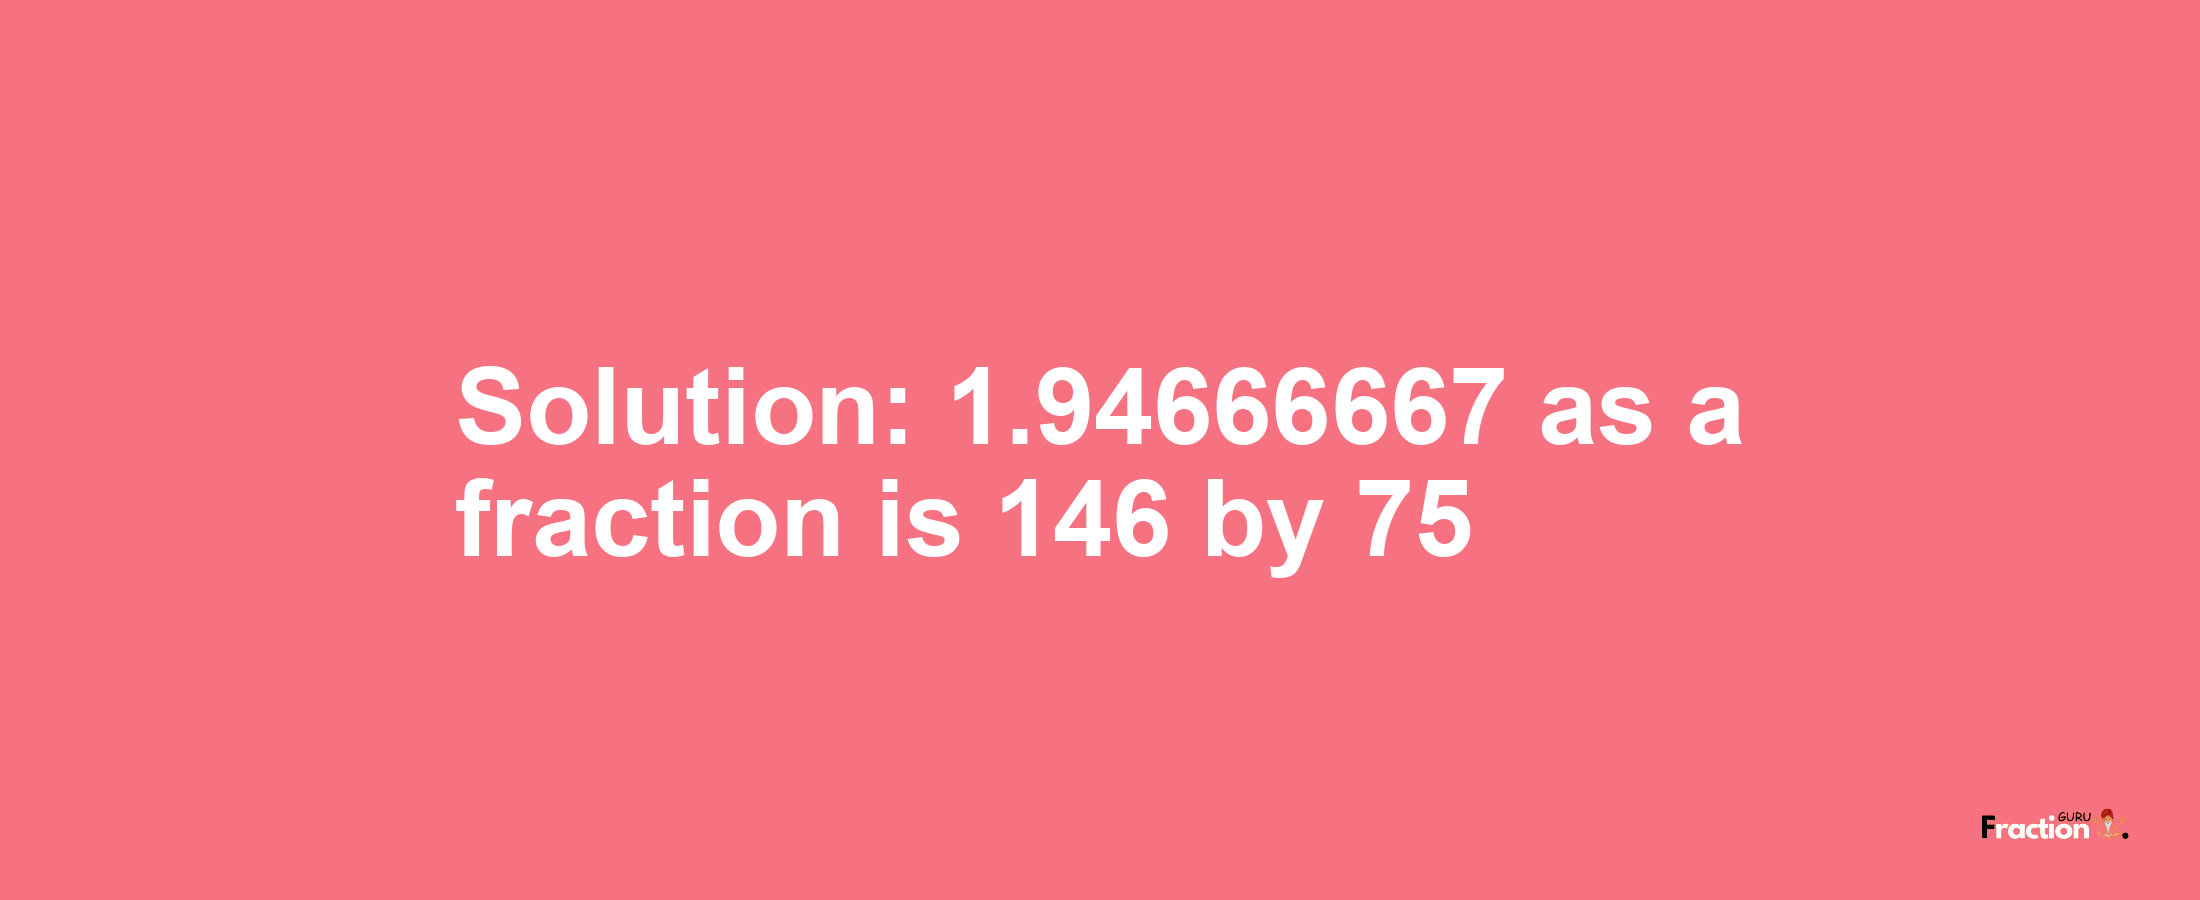 Solution:1.94666667 as a fraction is 146/75